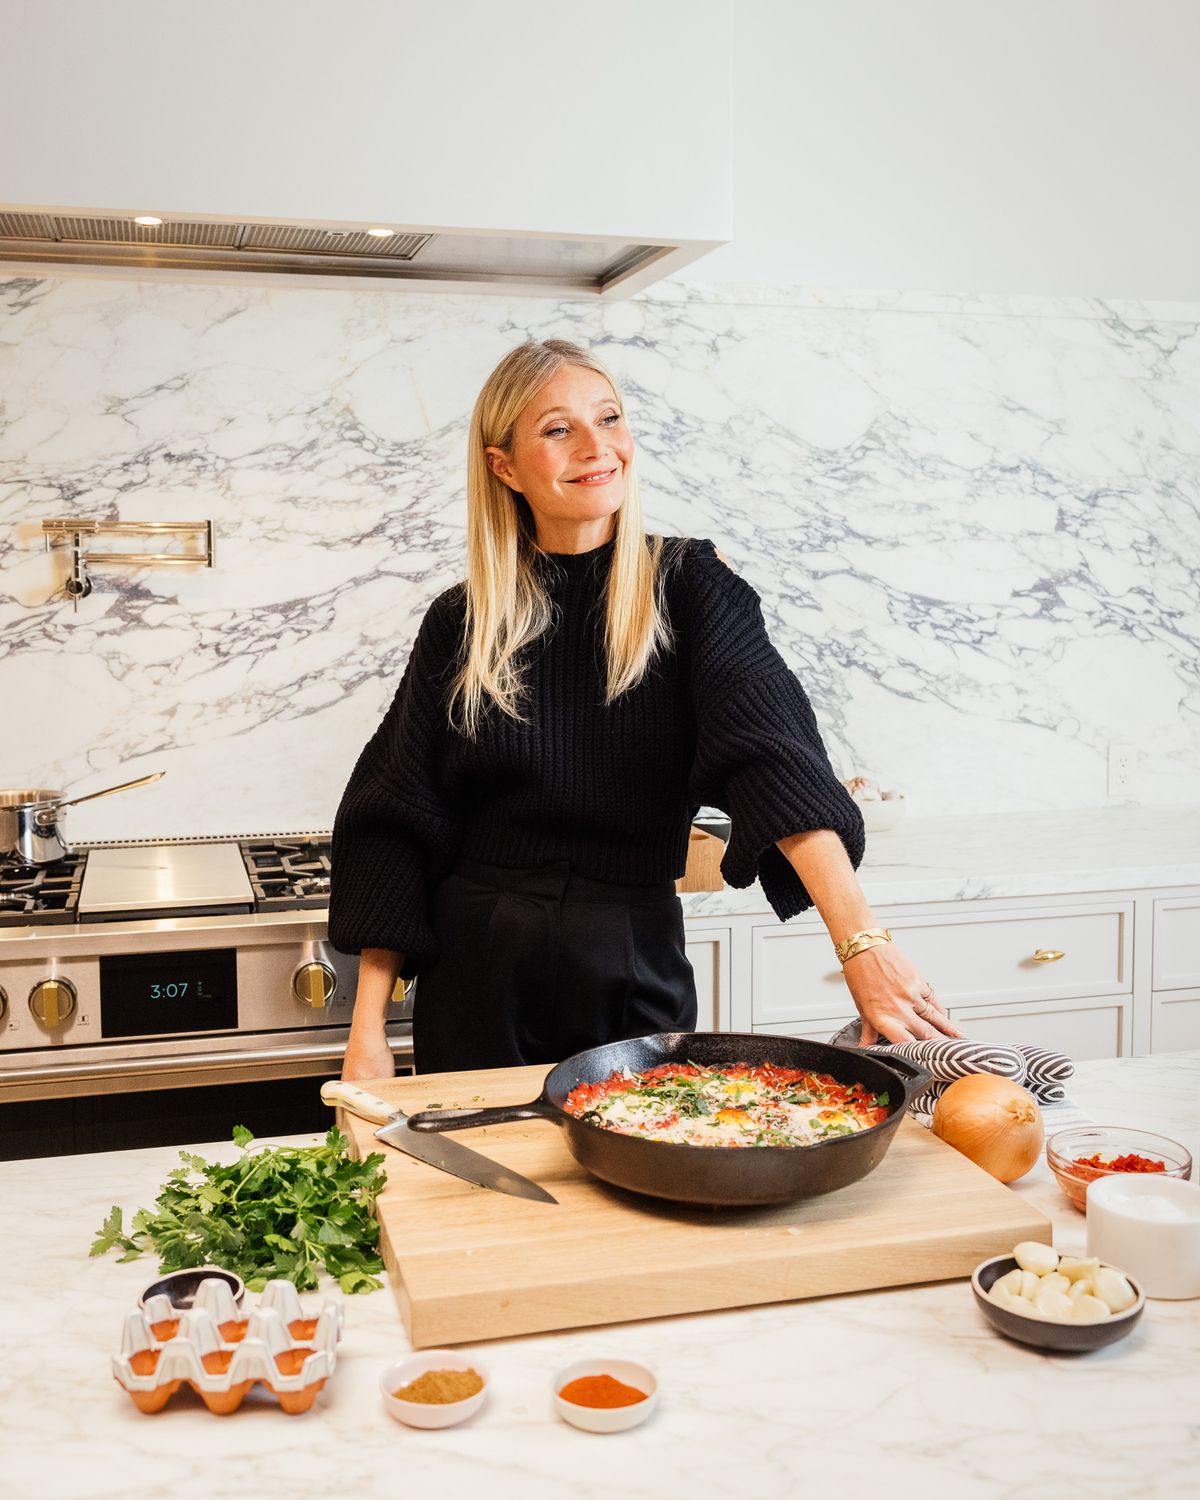 gwyneth paltrow by tanveer badal photography  architectural, interiors, product, lifestyle, food photography  monogram kitchen appliances, general electric  tanveerbadalcom  tanveerbadal